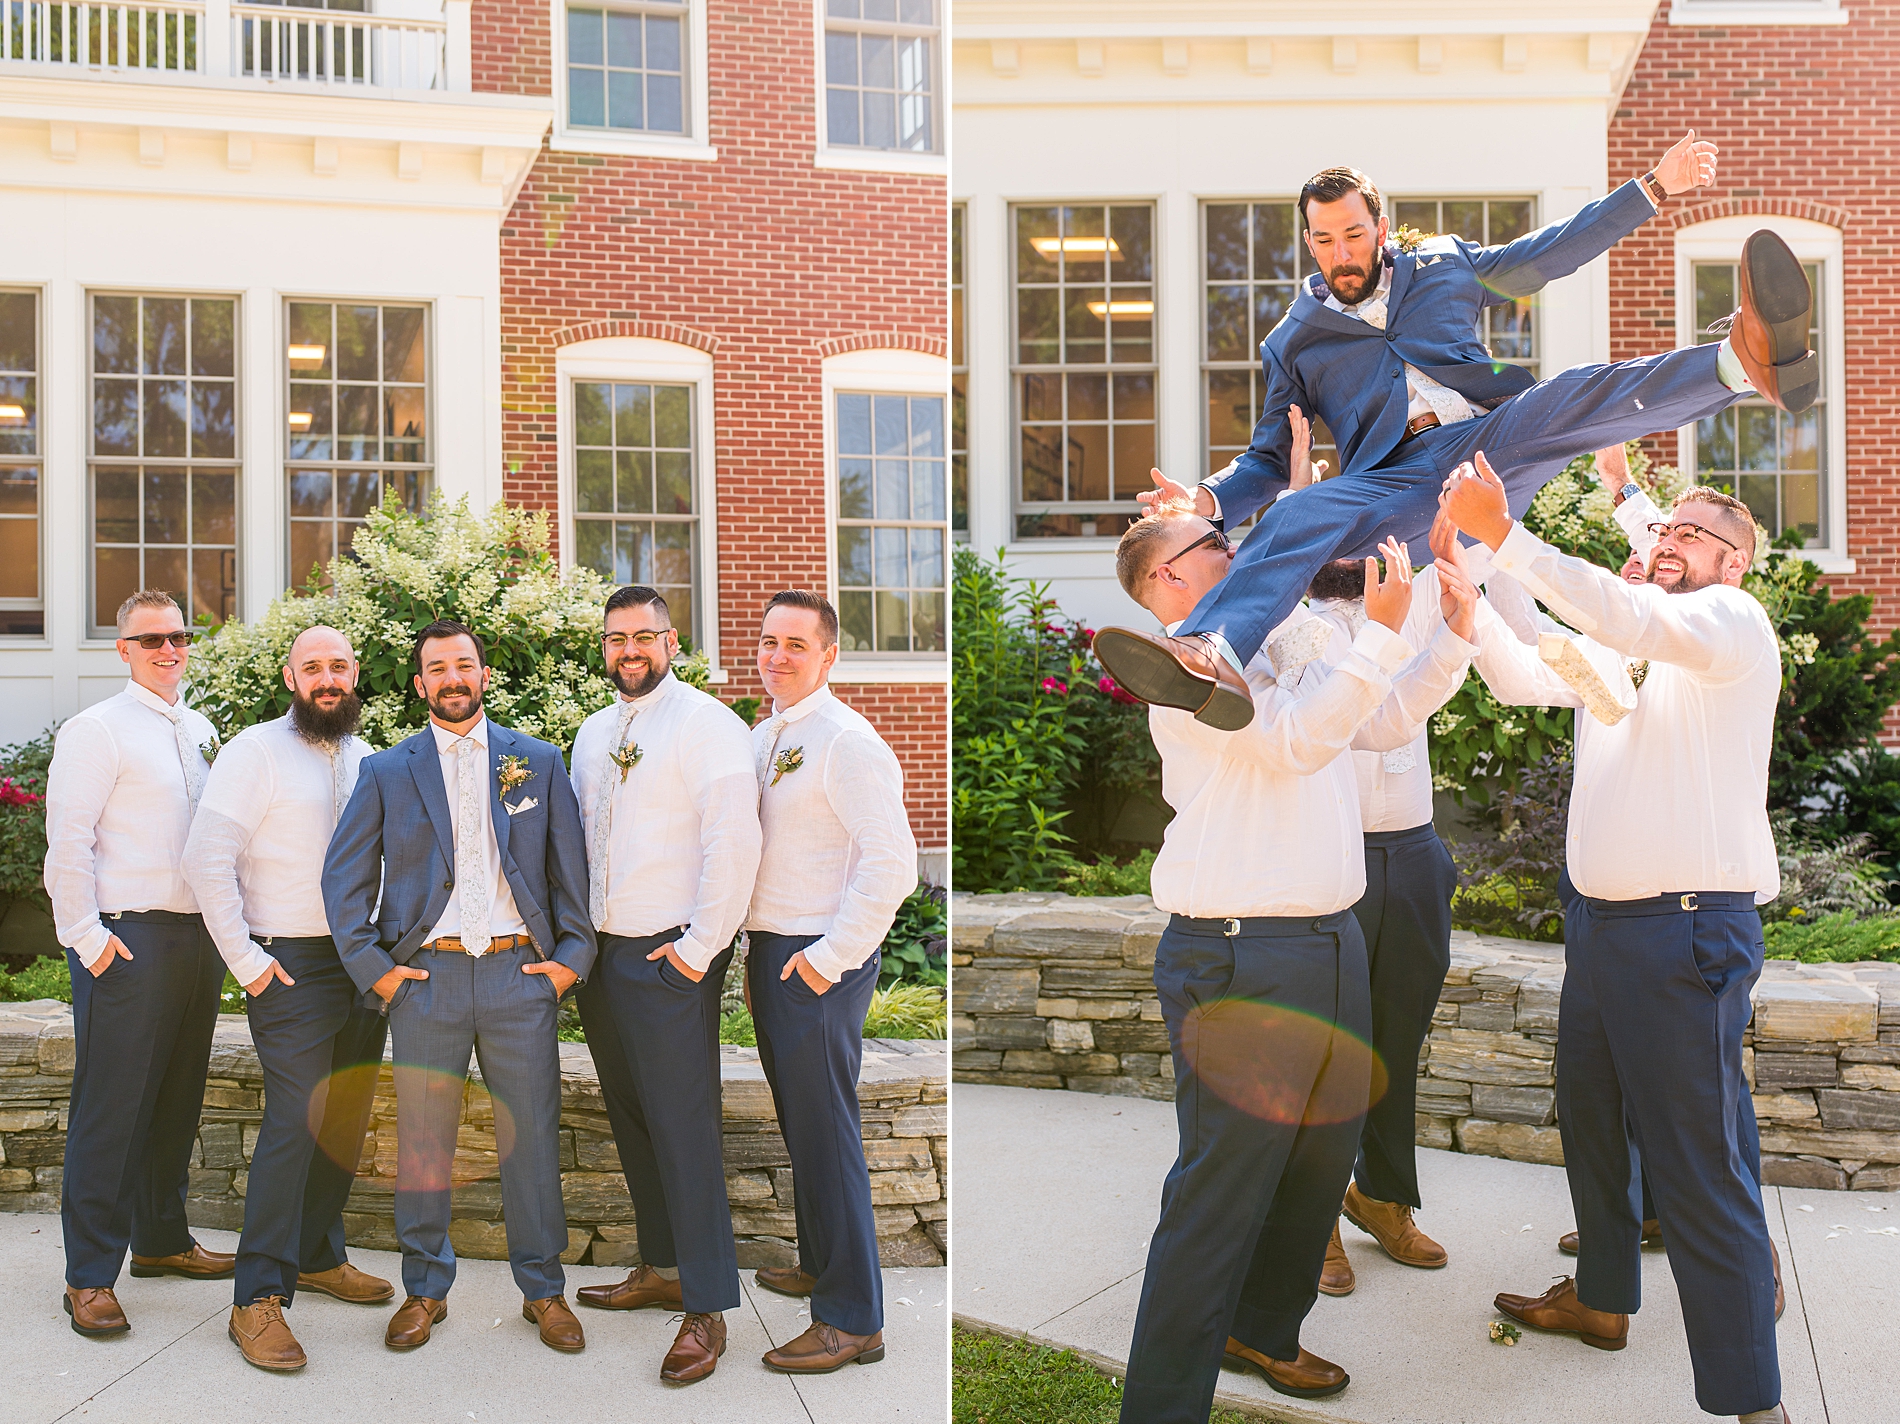 groomsmen hold up groom for a fun photo